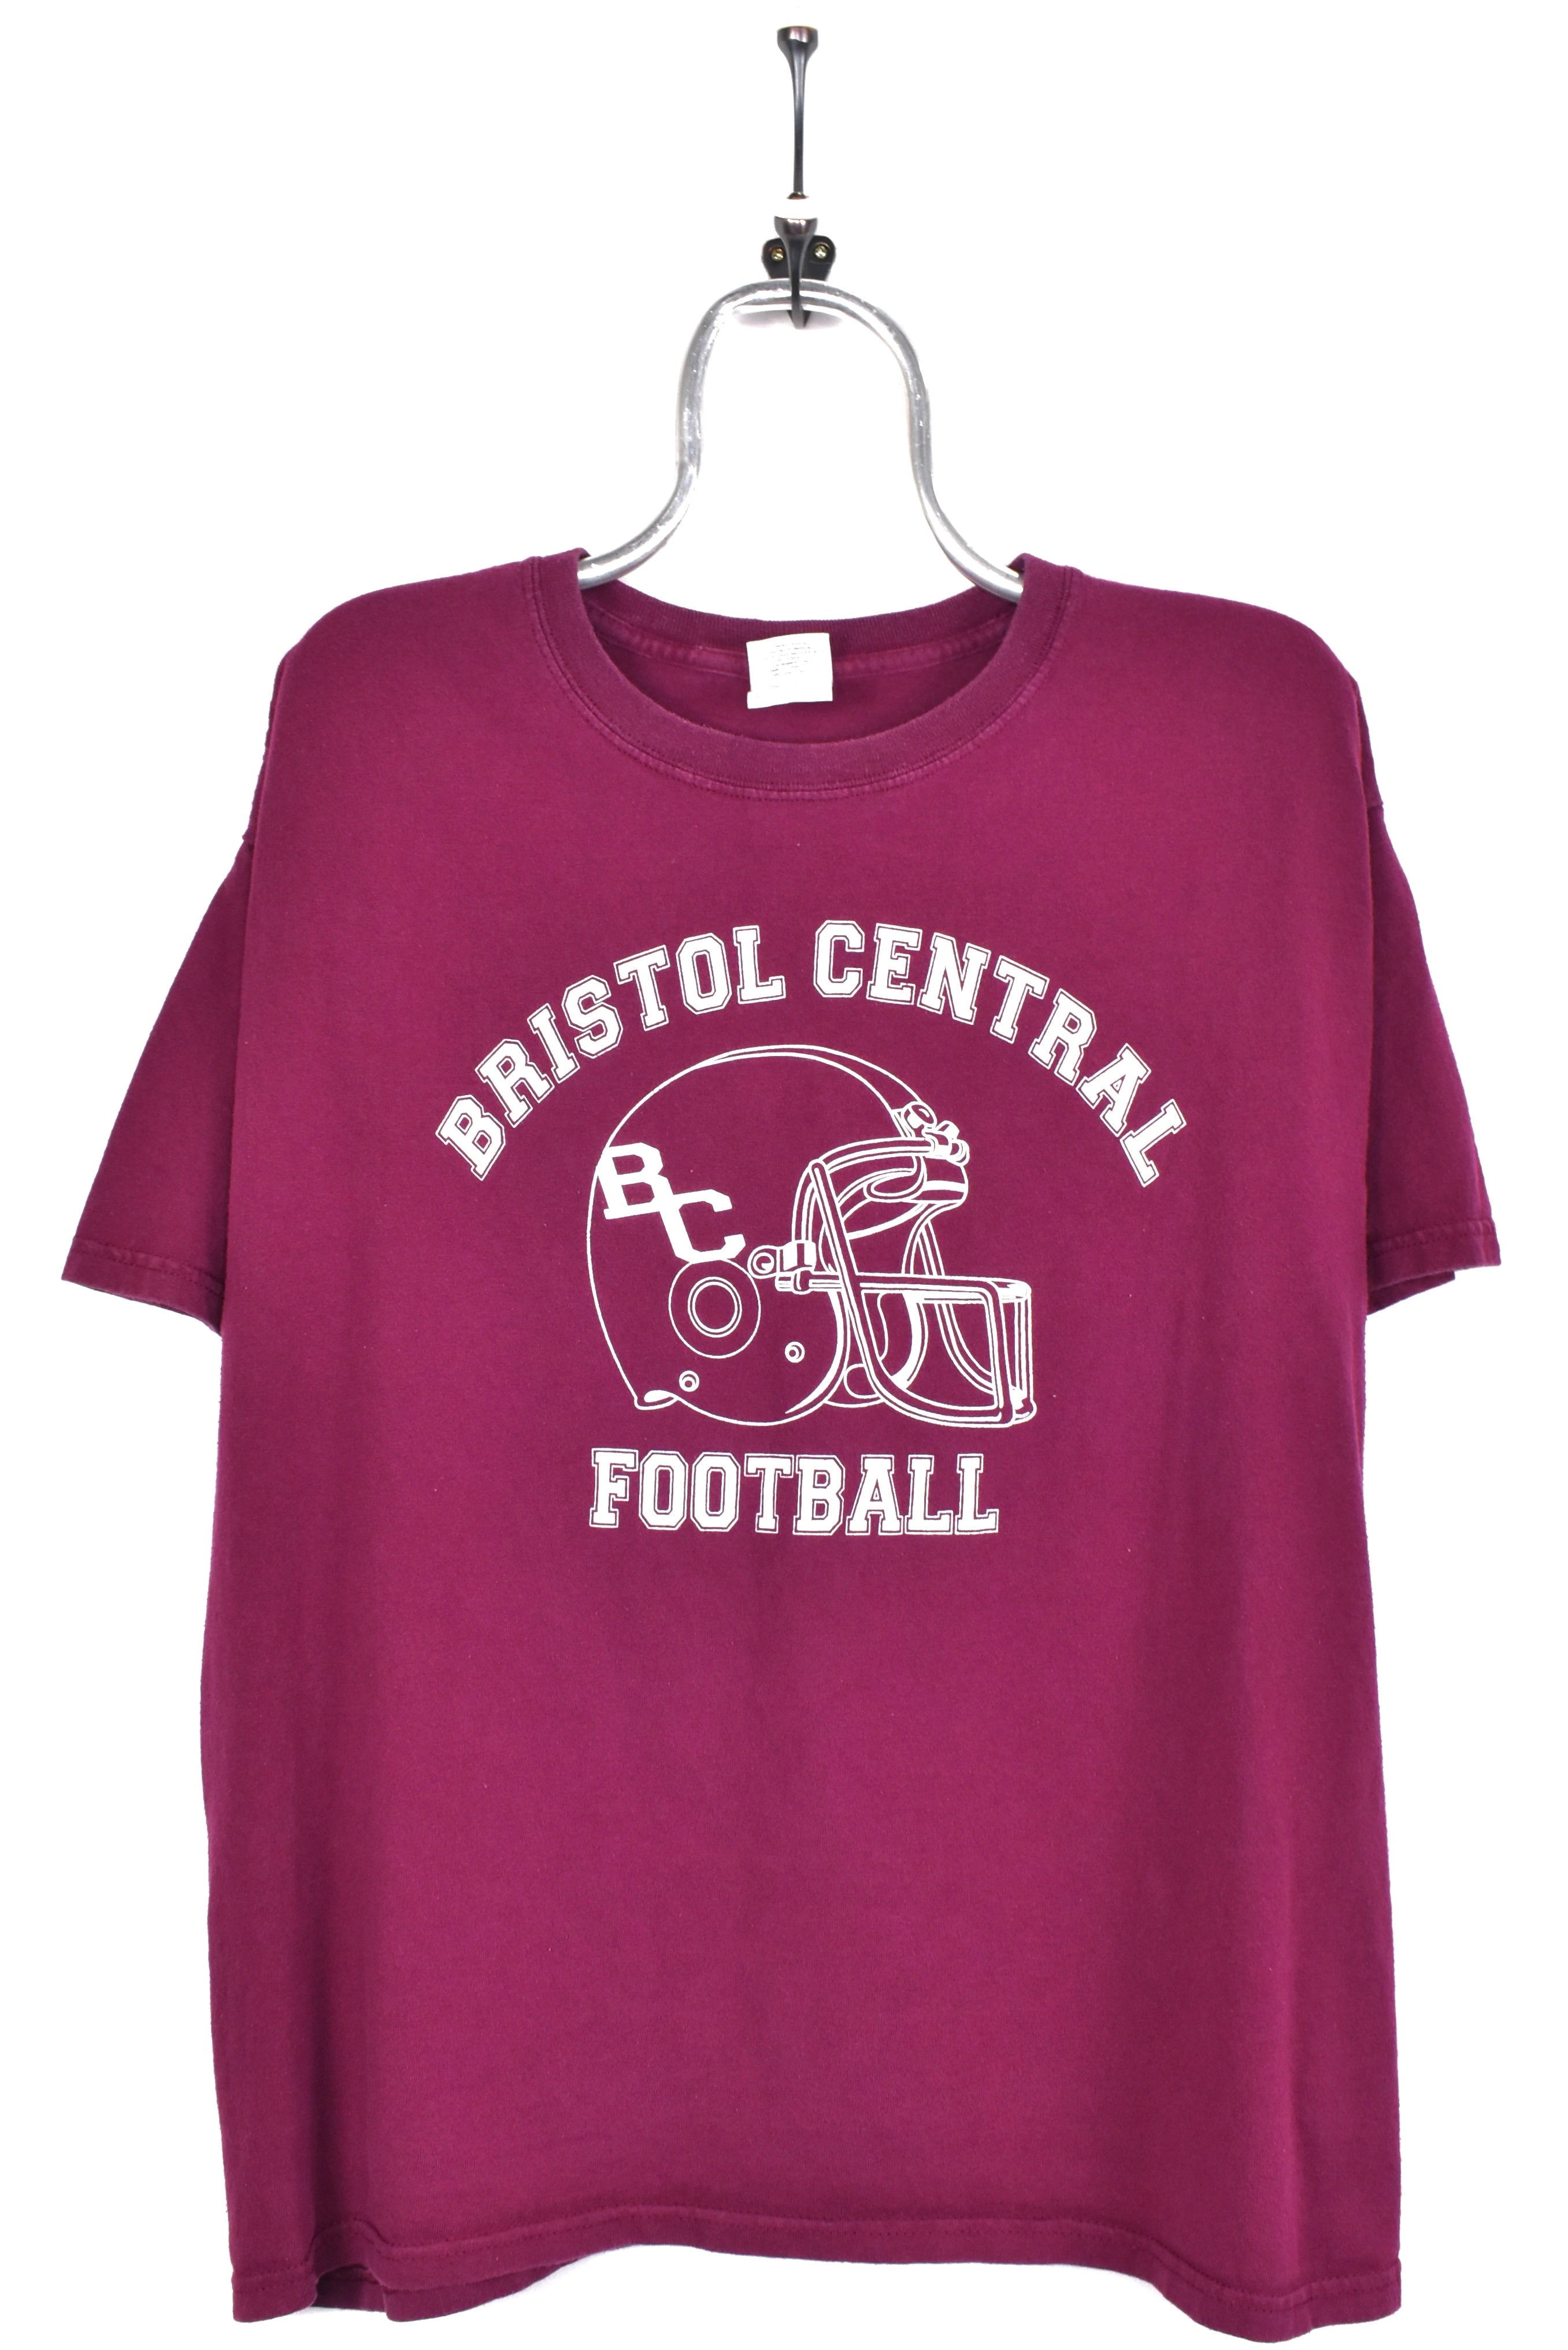 Vintage Bristol Central shirt, college football graphic tee - AU Large COLLEGE